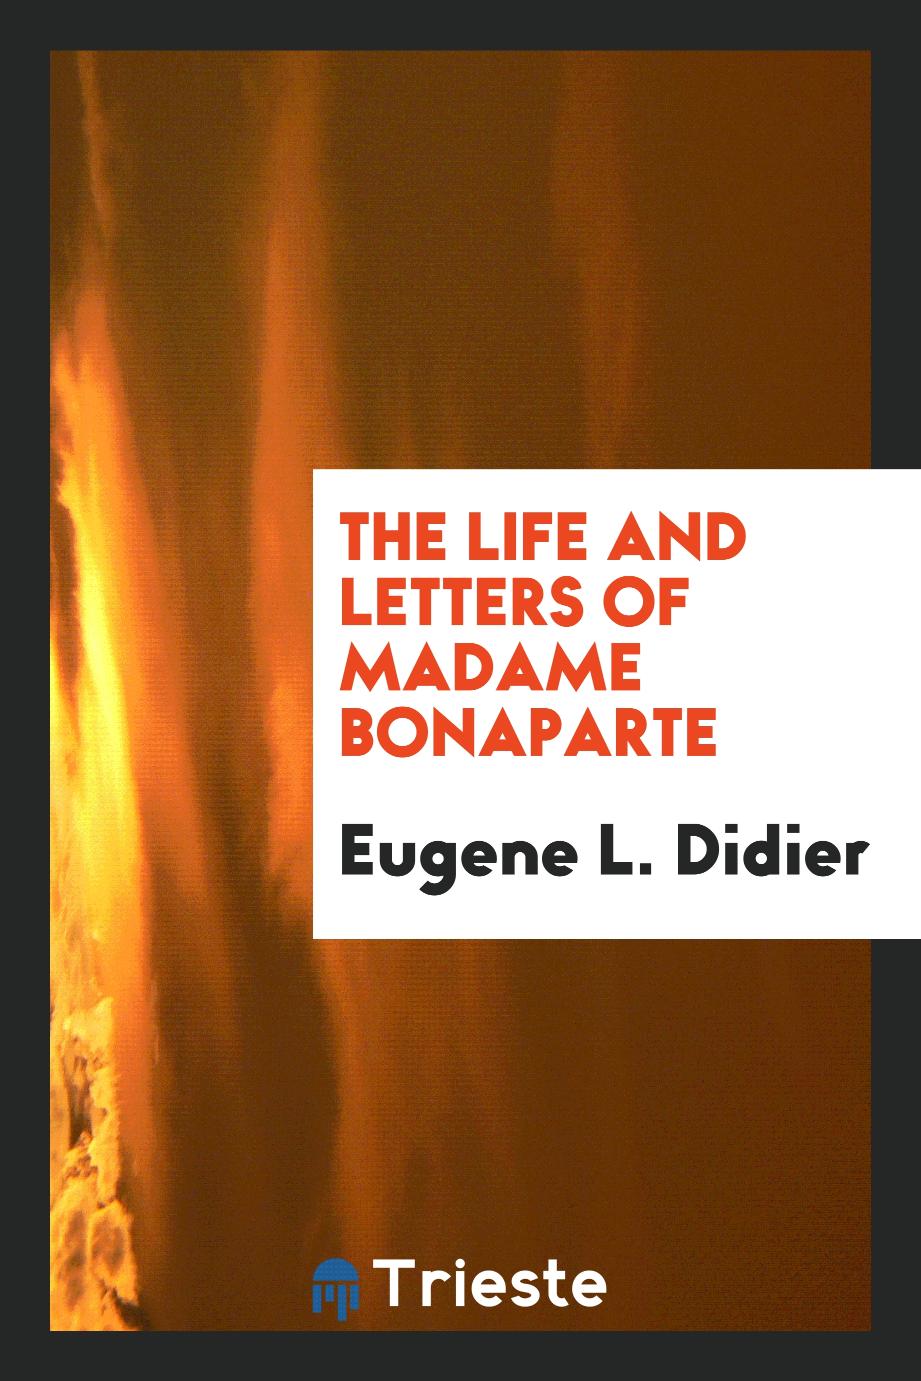 The life and letters of Madame Bonaparte